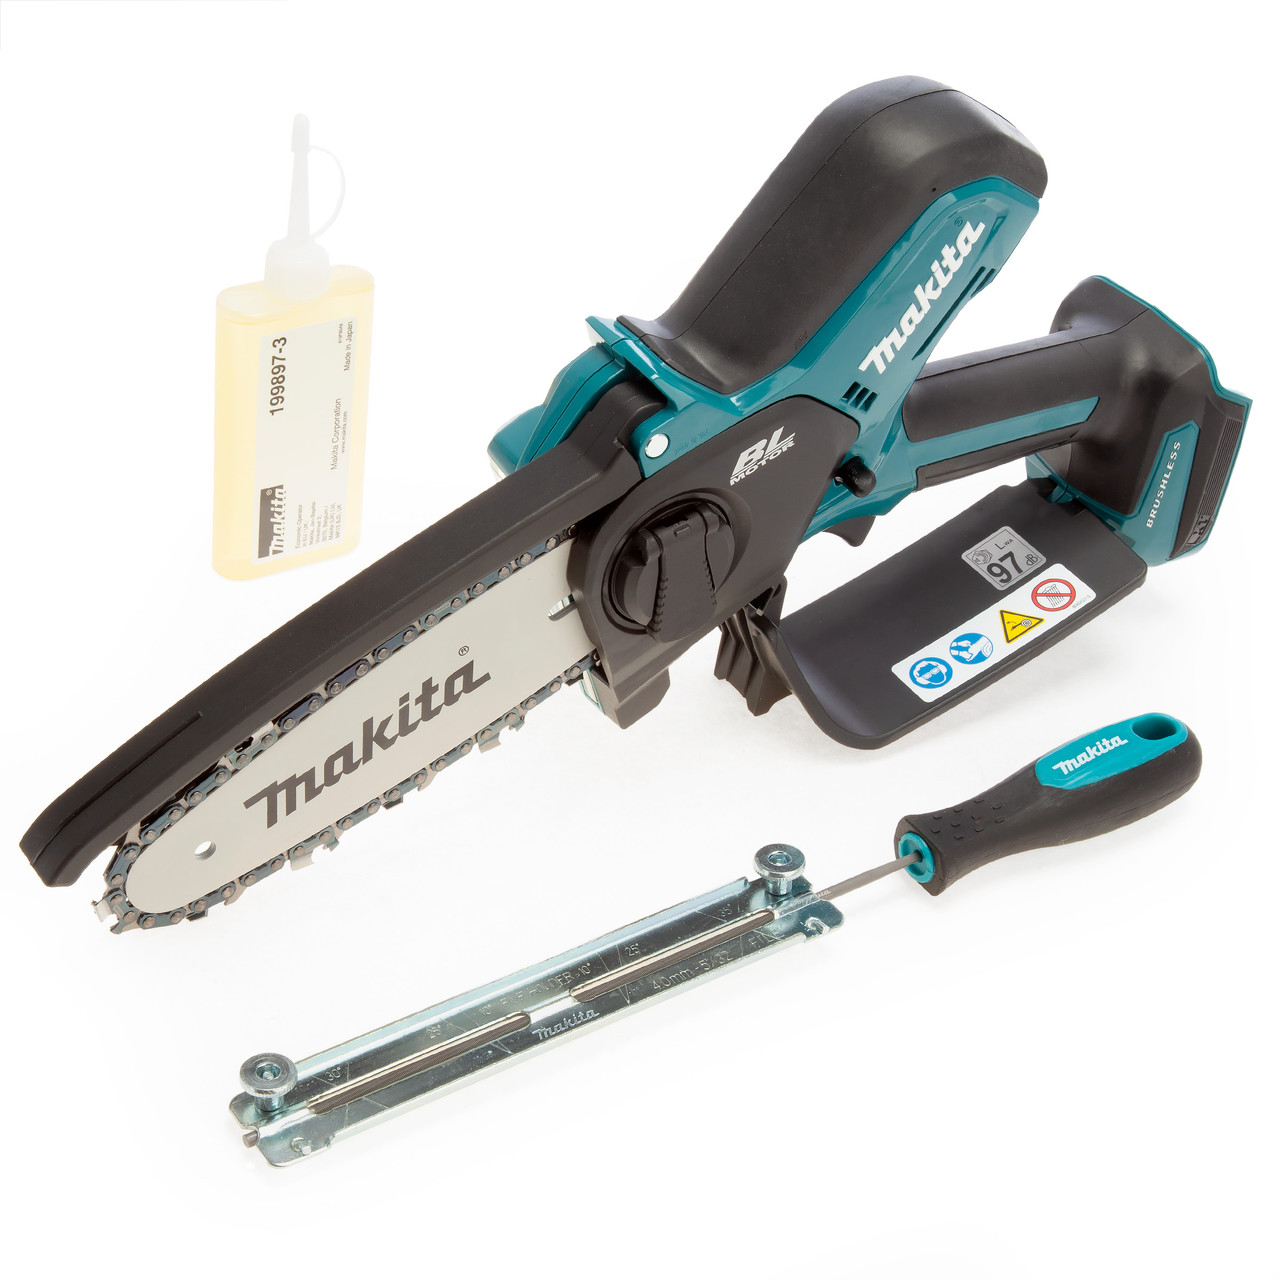 Photos - Power Saw Makita DUC150Z 18V LXT Brushless Pruning Saw 150mm  (Body Only)